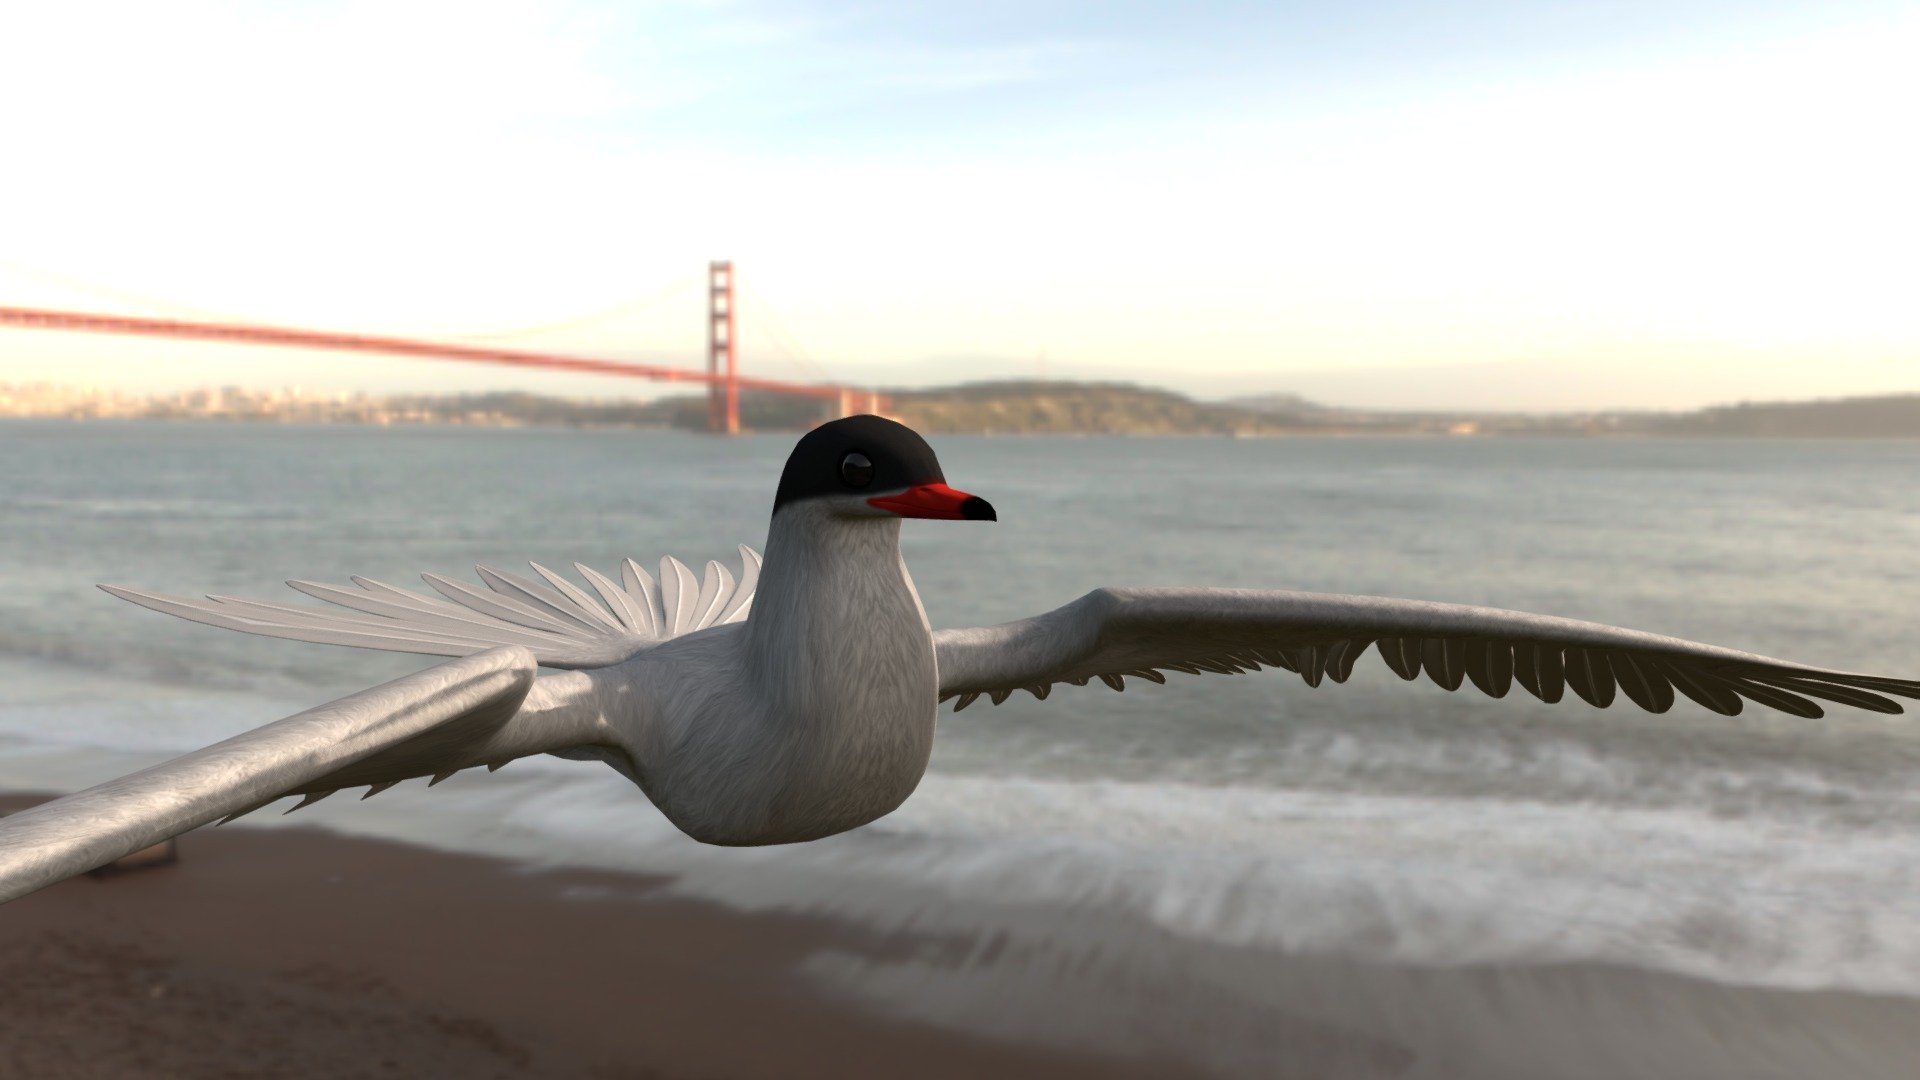 This is my model of a Arctic Tern bird with 16 animations and poses. In the wild these birds cover the Arctic and sub-Arctic regions of Europe, Asia, and North America.

Modeling, rigging, animating, &amp; textures were created with: Blender + Paint.net graphics editor 3d model